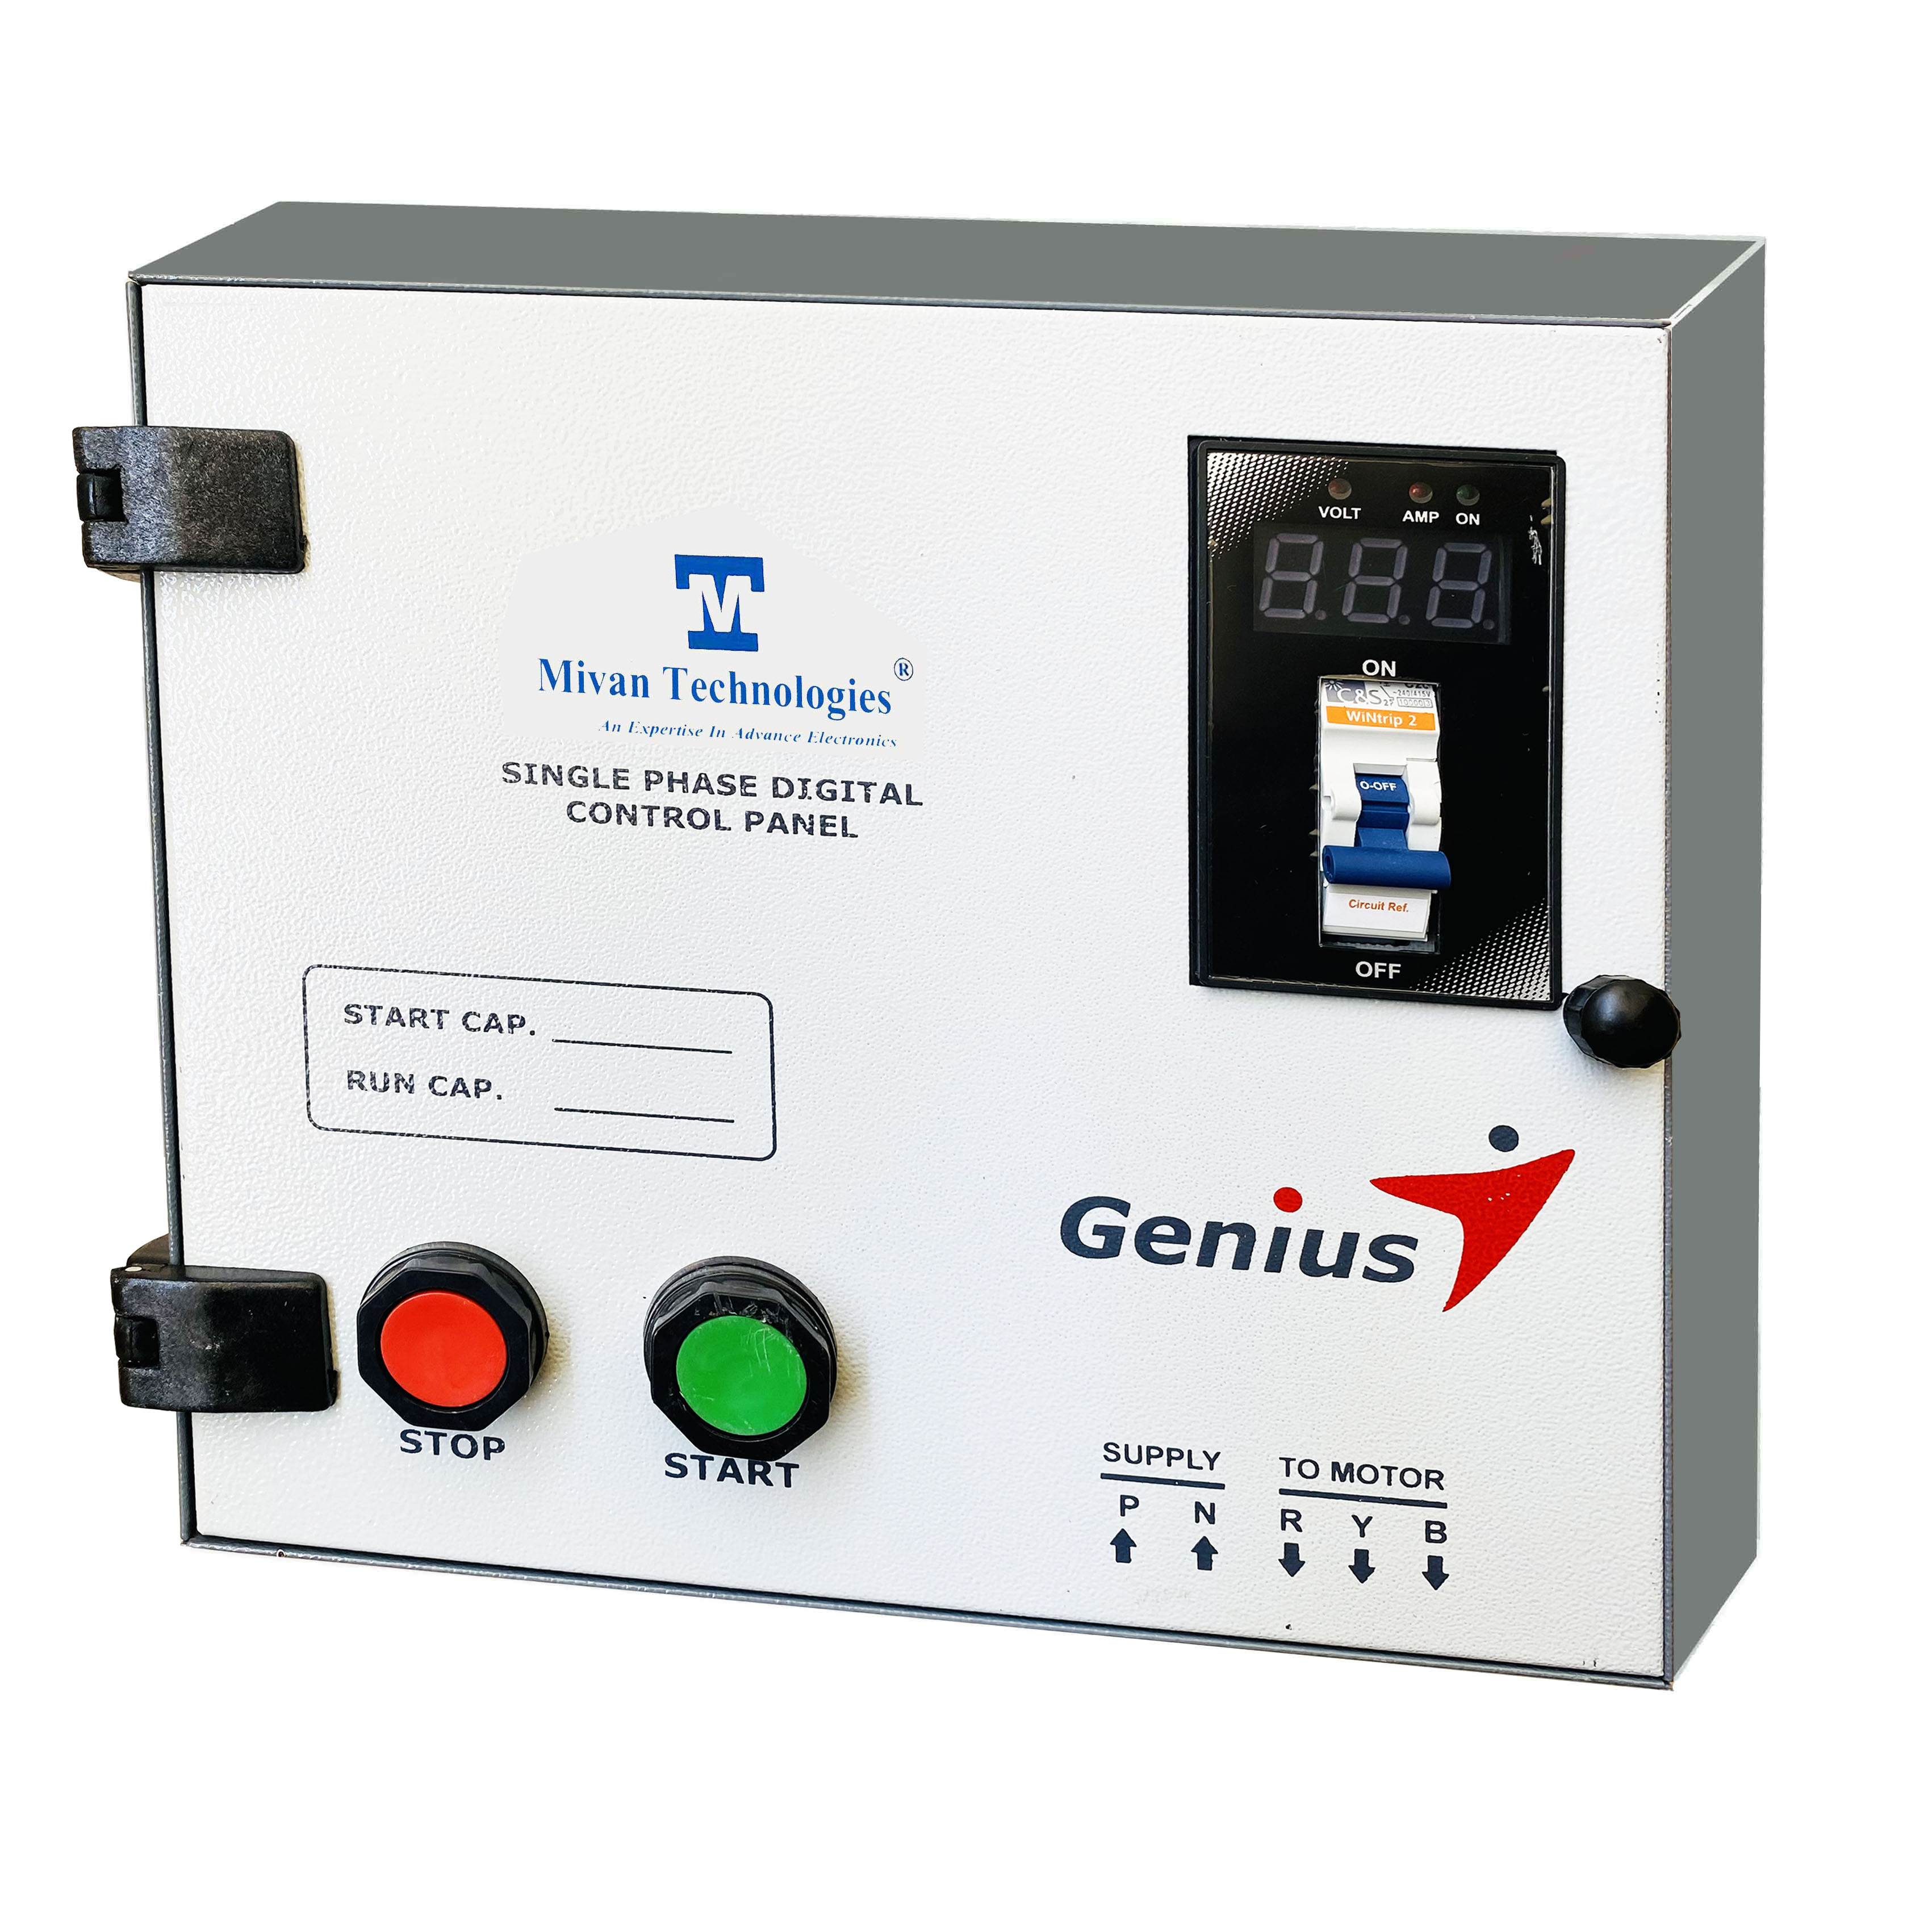 DMPS SR 2 HP Single phase motor Digital starter panel with BCH contactor with digital volt and amp meter and MCB start and run capacitor